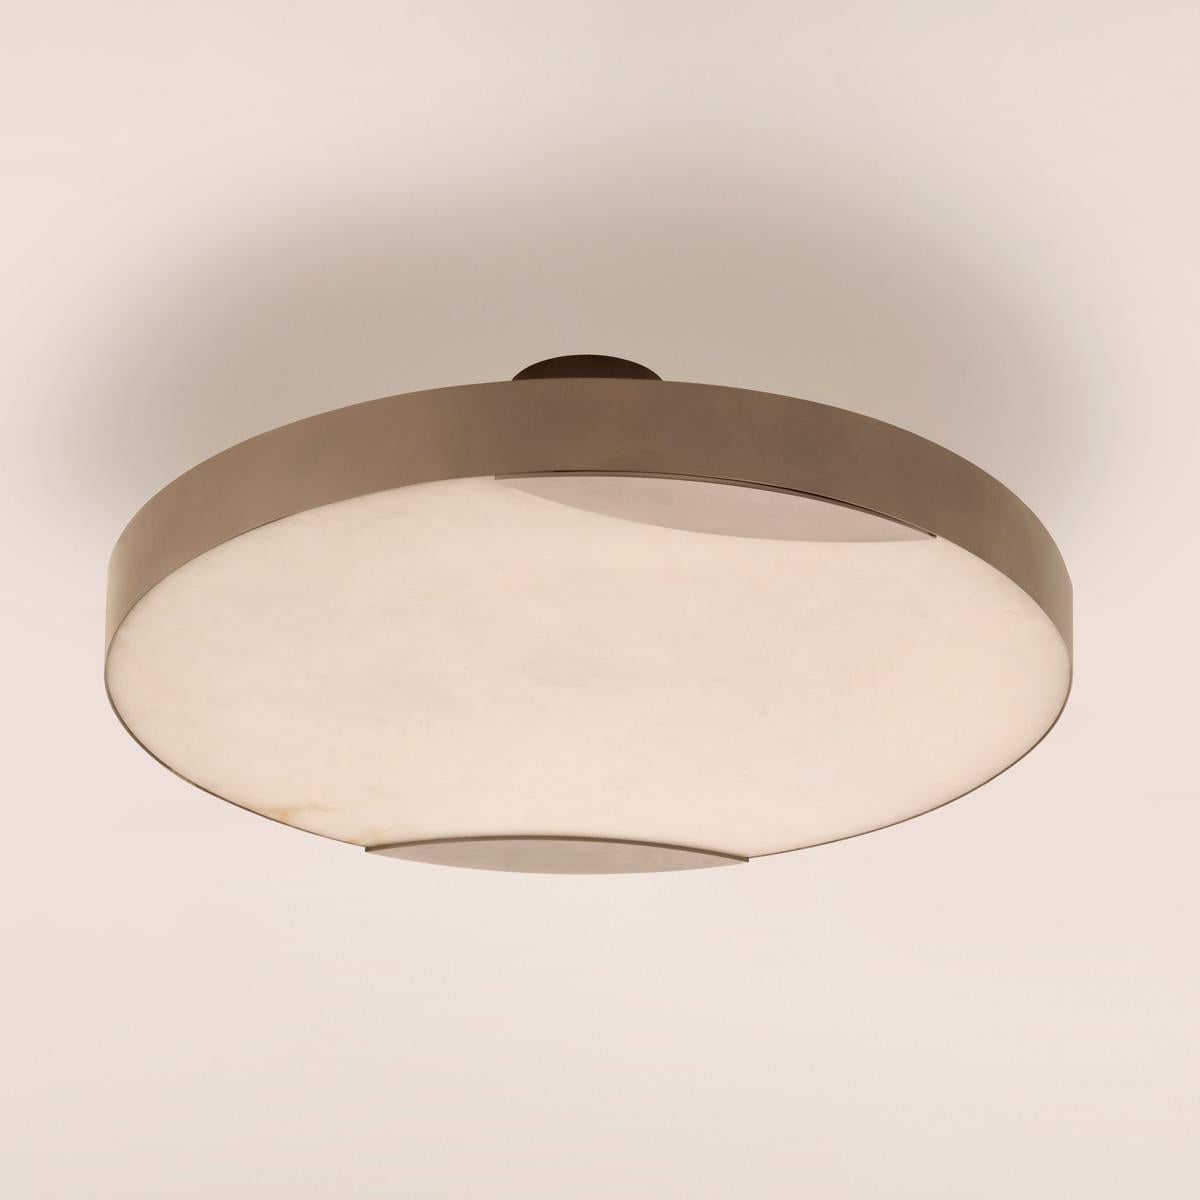 Italian Cloud N.1 Ceiling Light by Gaspare Asaro-Polished Nickel Finish For Sale